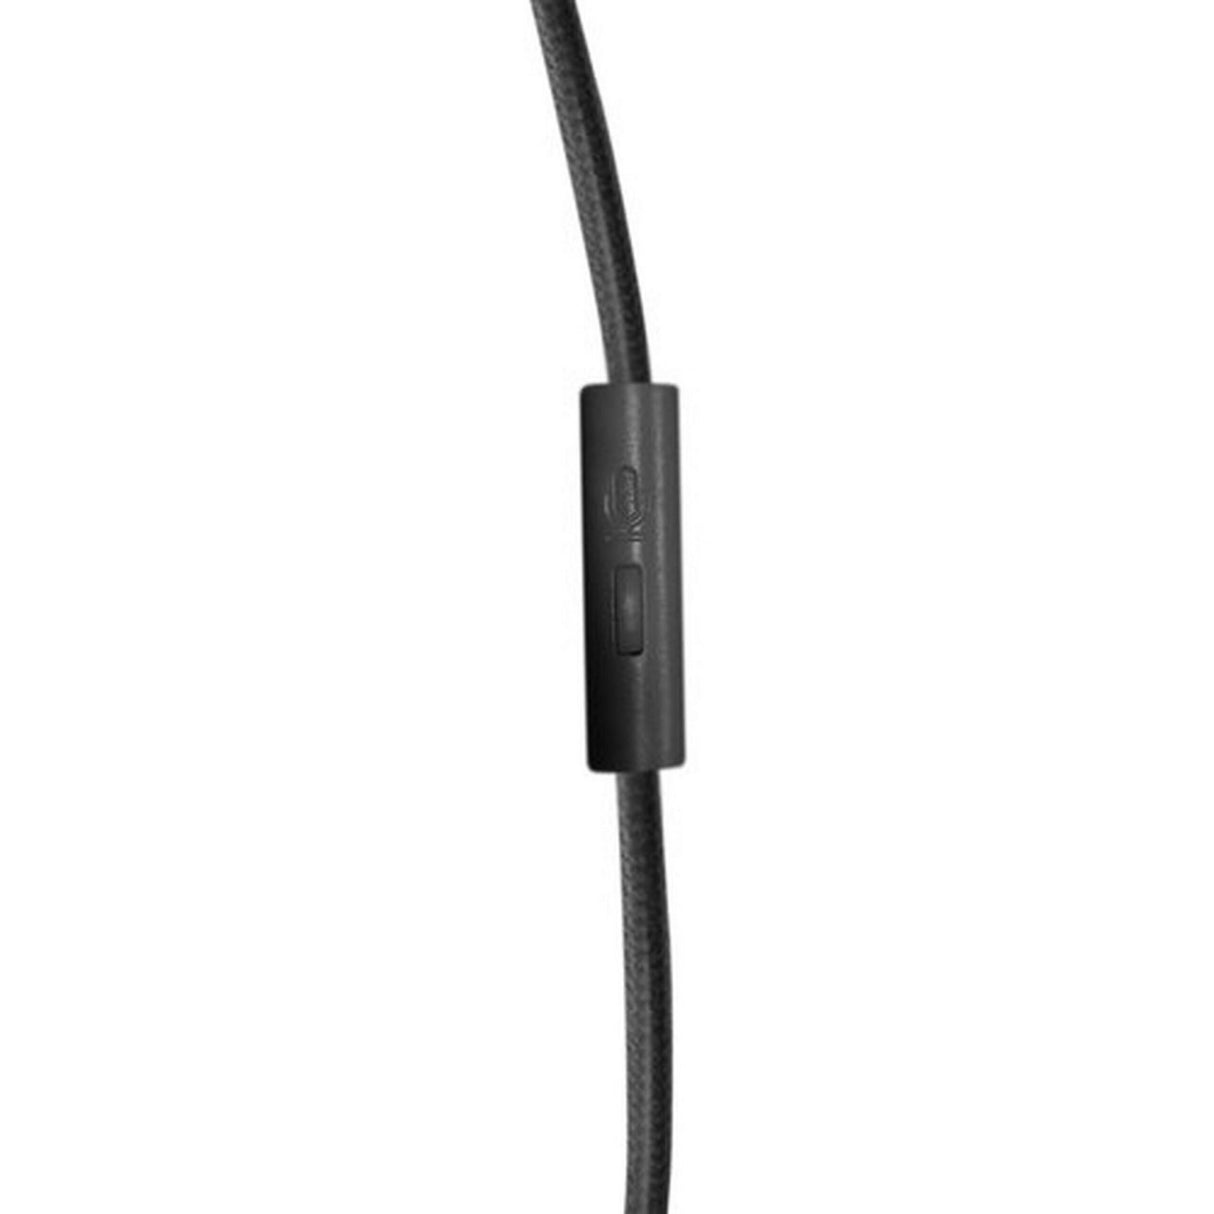 HamiltonBuhl FV-BLK Favoritz TRRS Headset with In-Line Microphone, Black